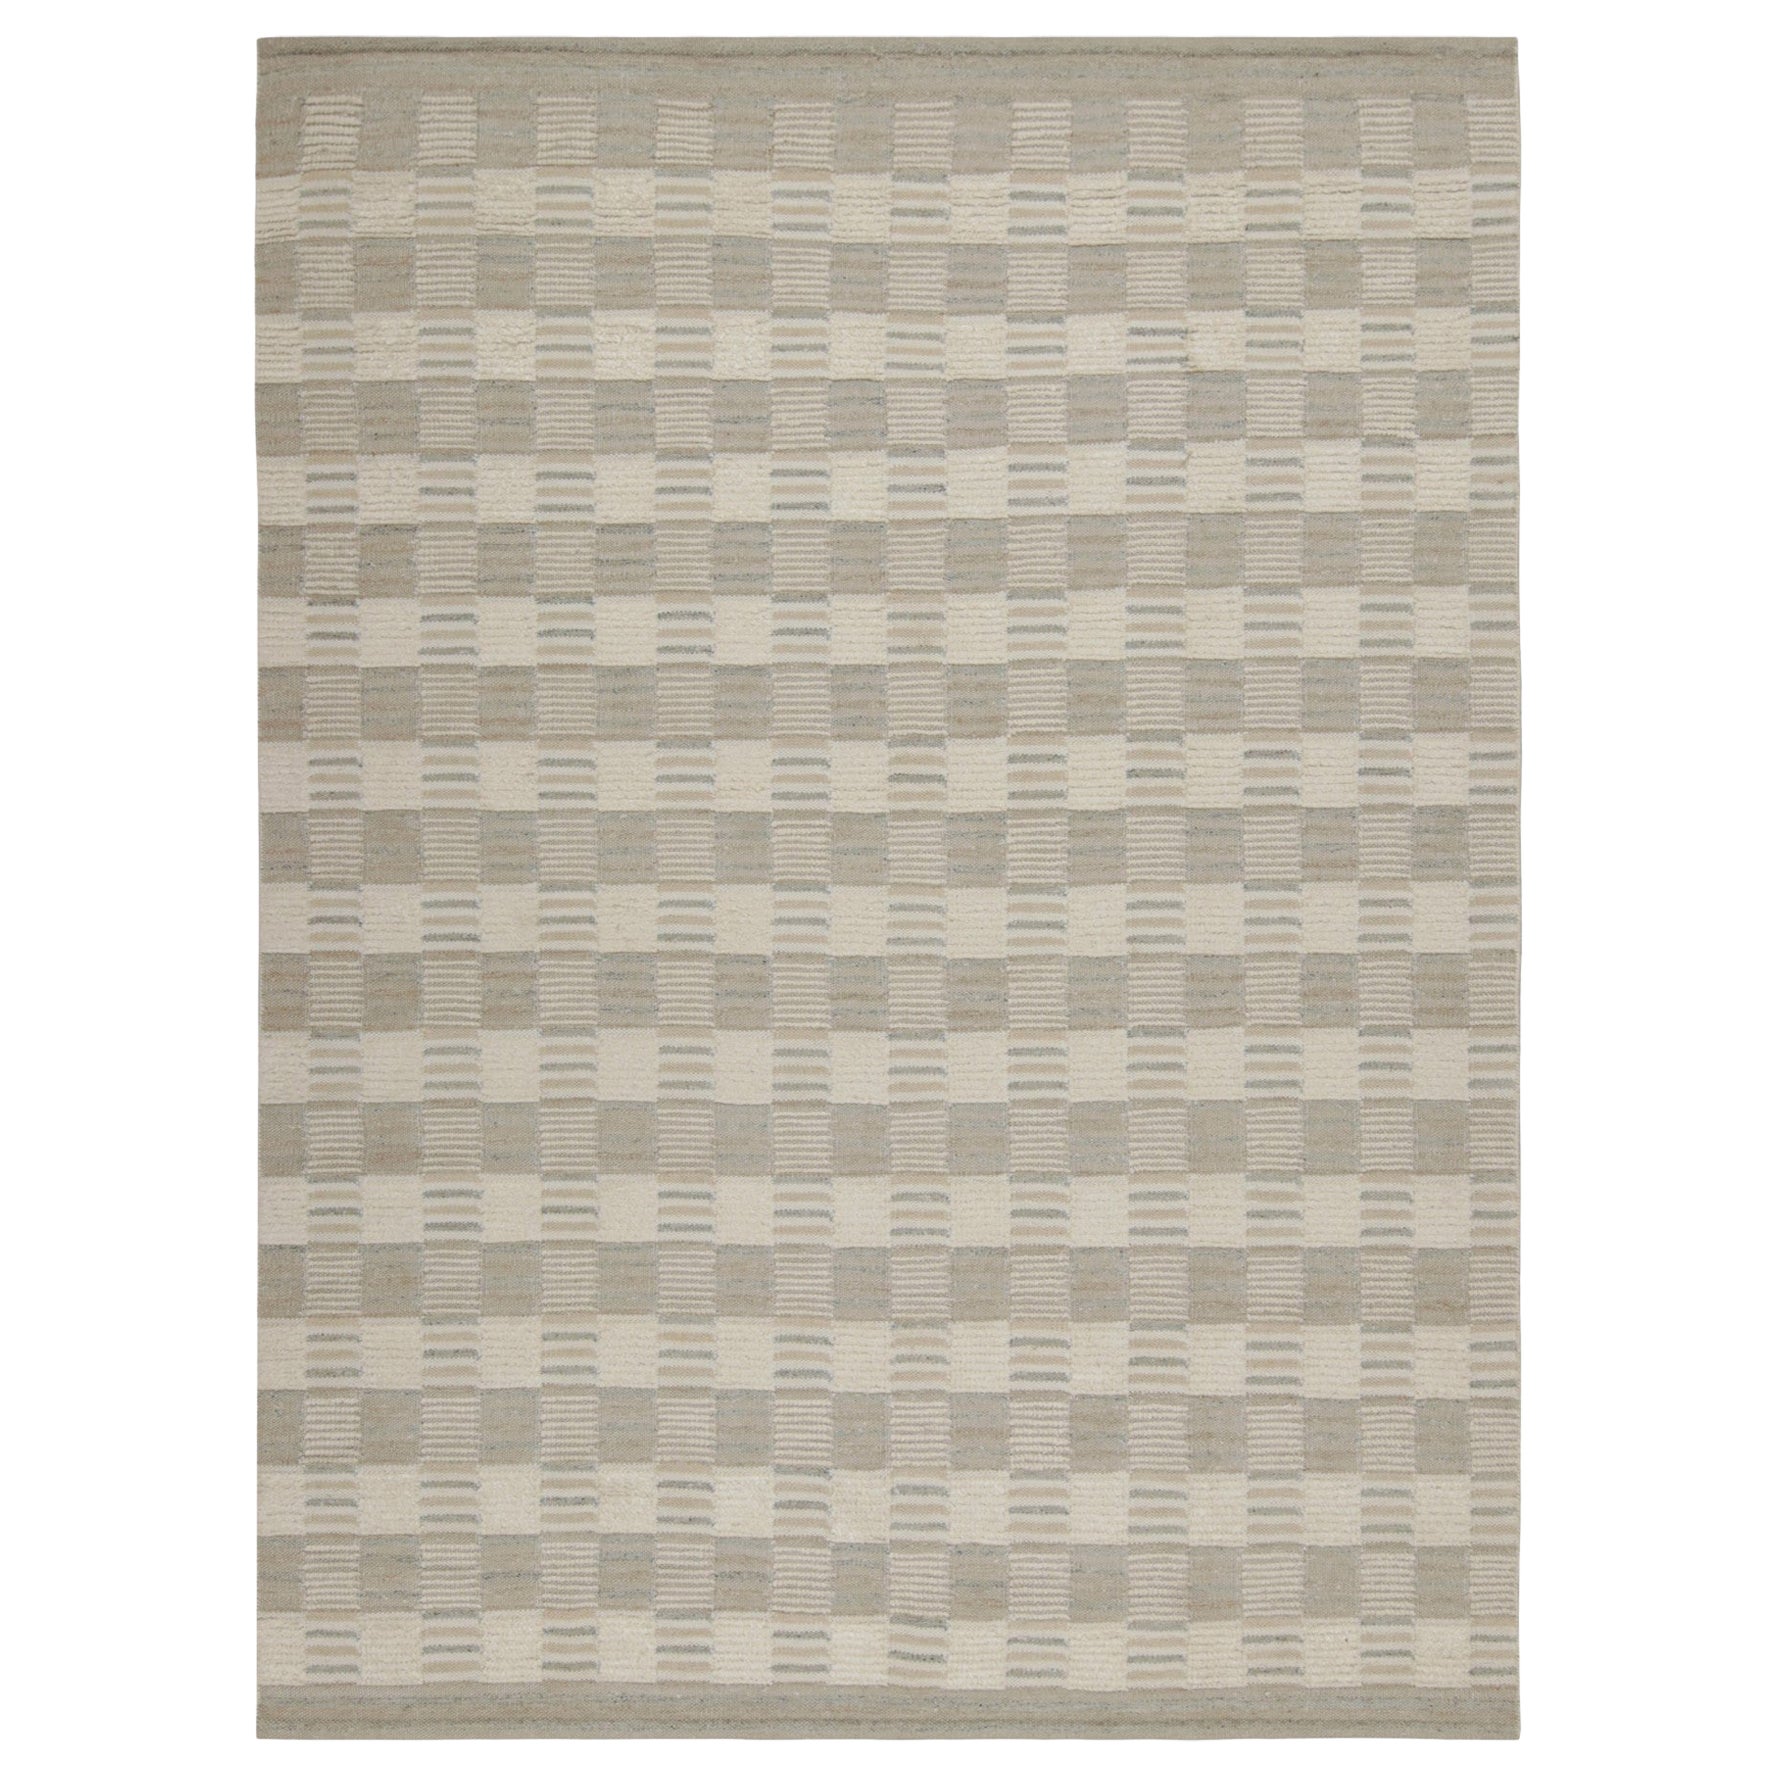 Rug & Kilim’s Scandinavian Style Rug with Grey & White Geometric Patterns For Sale